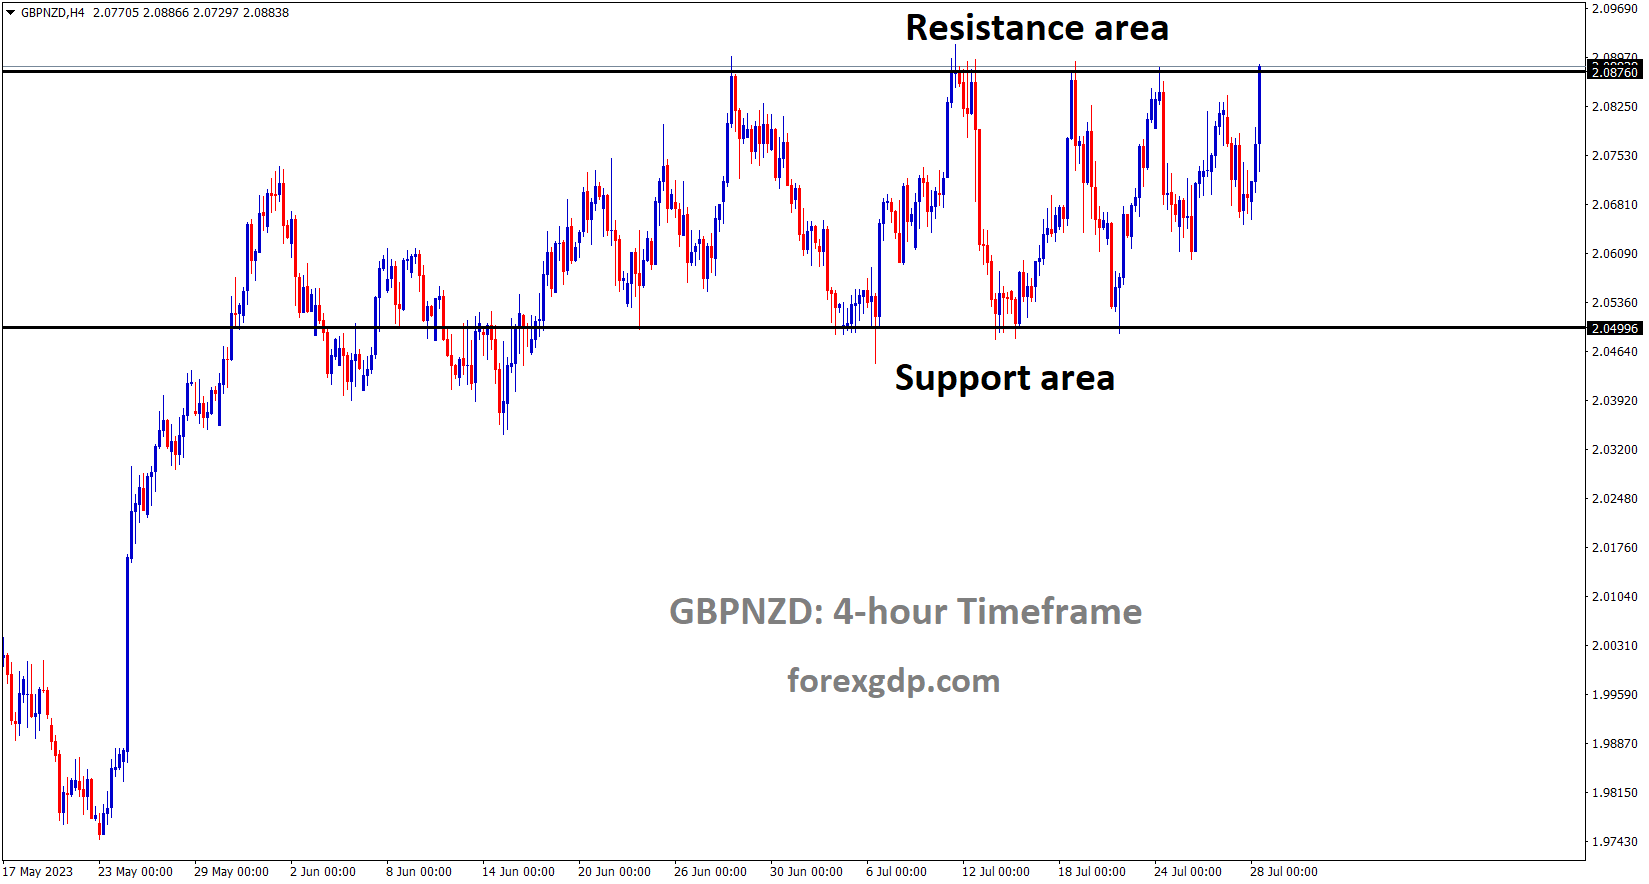 GBPNZD is moving in the Box pattern and the market has reached the resistance area of the pattern